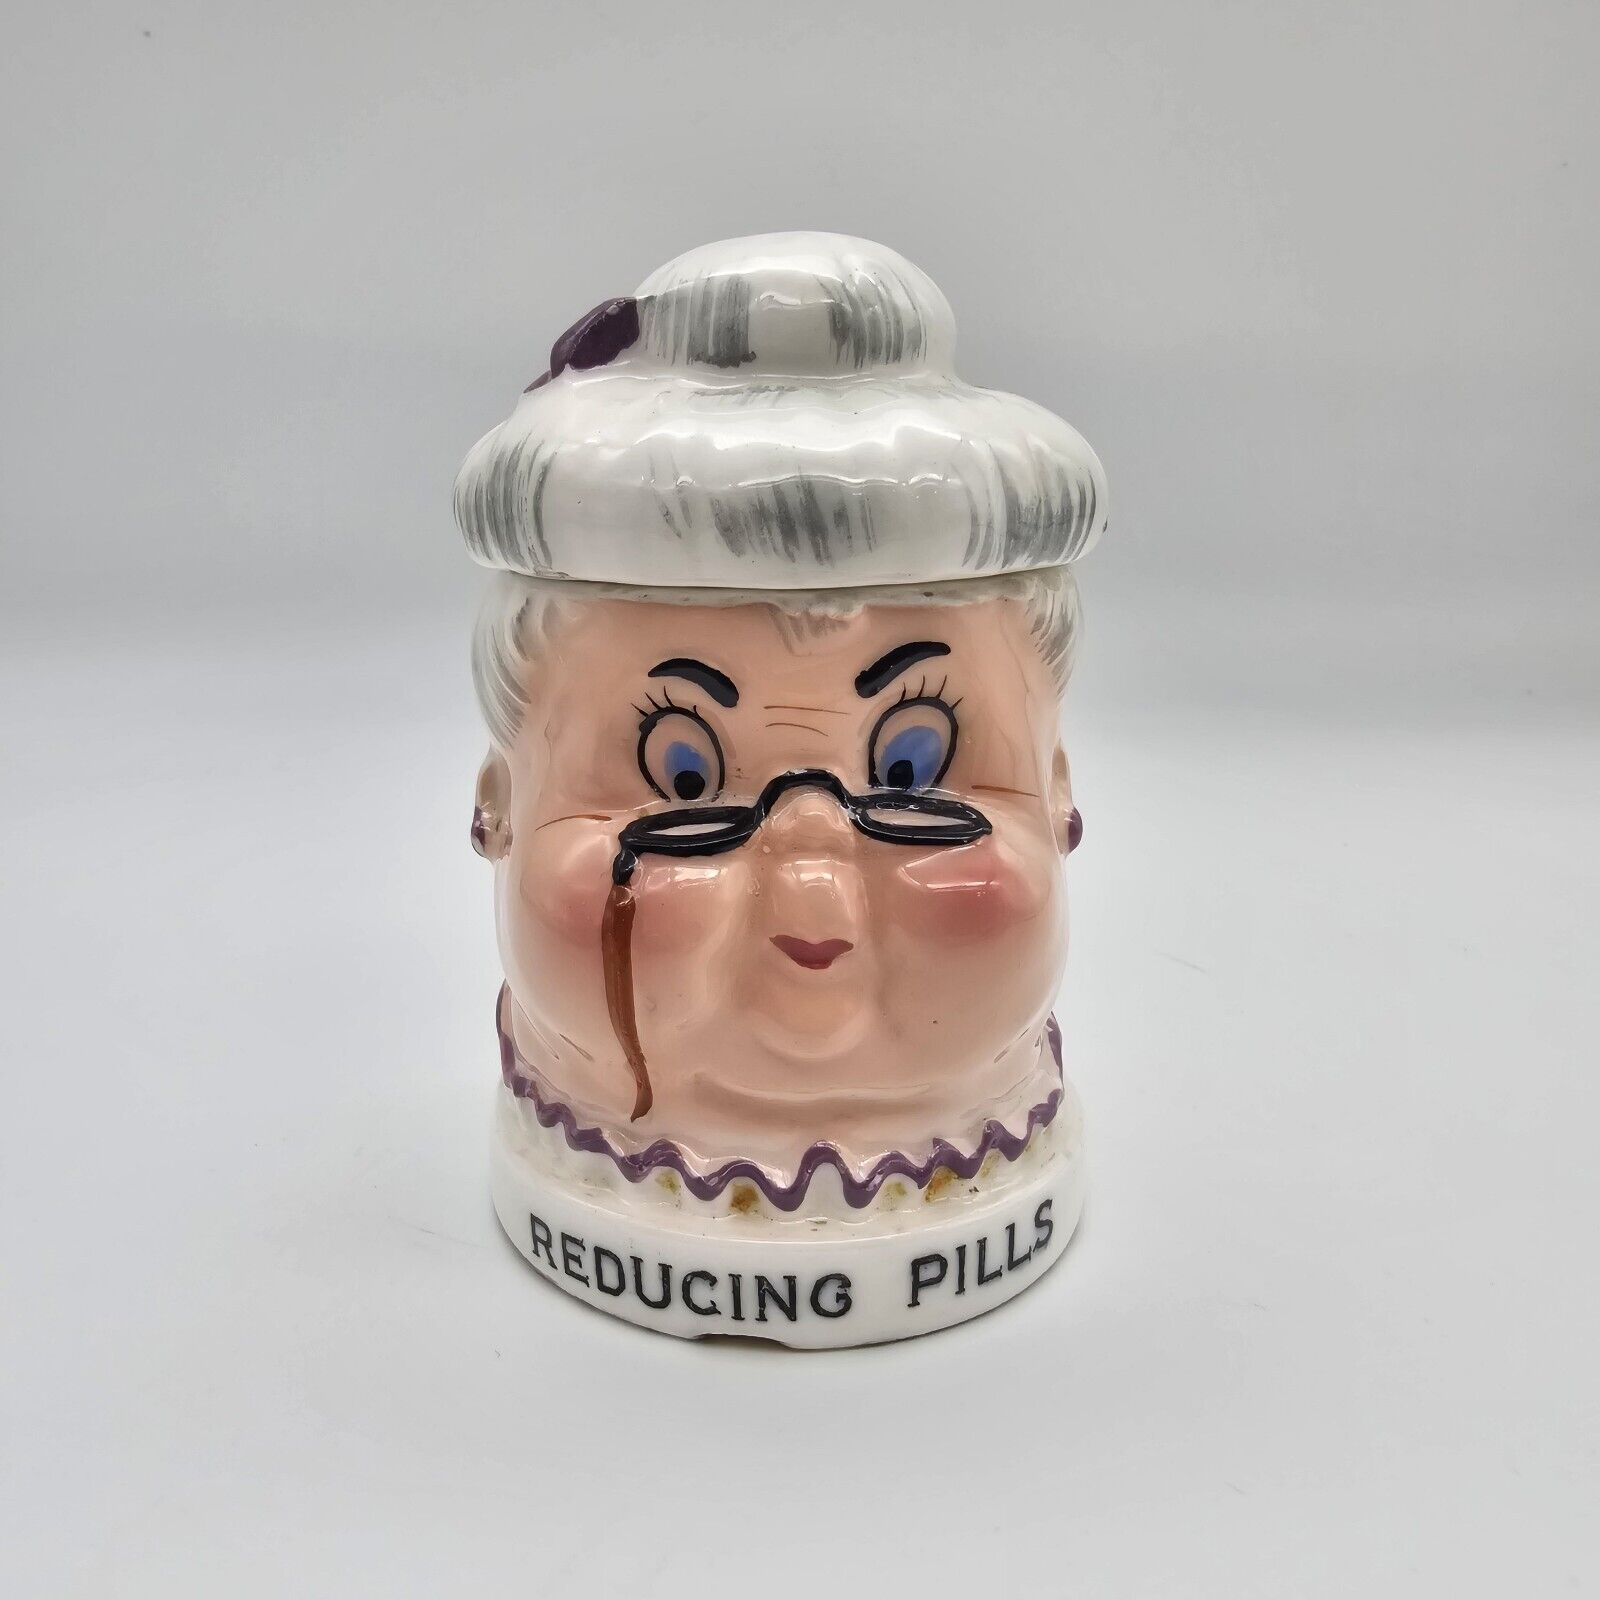 Vintage Midcentury Reducing Pills Canister -  1960 The Shafford Company